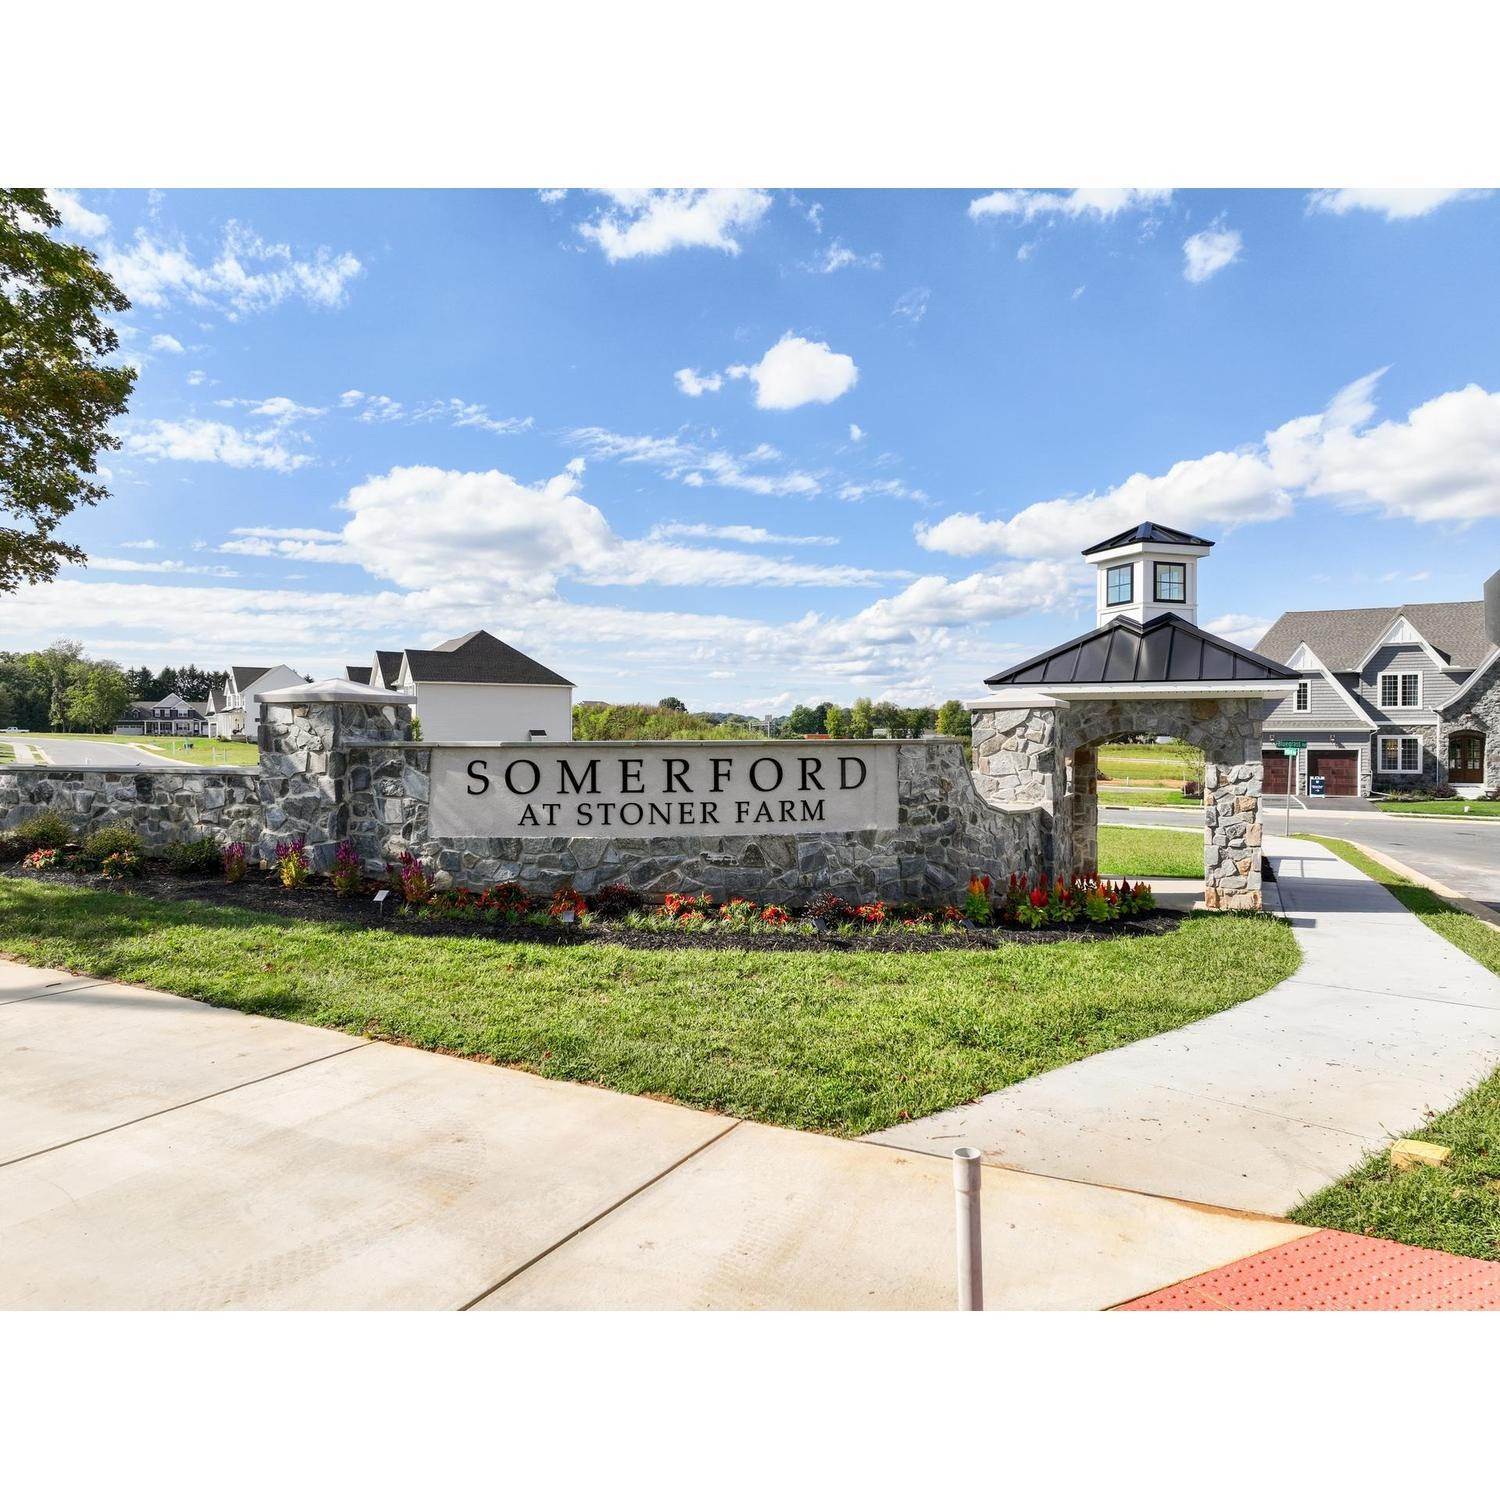 3. Somerford at Stoner Farm Carriage Homes building at 1301 Eden Rd, Lancaster, PA 17601